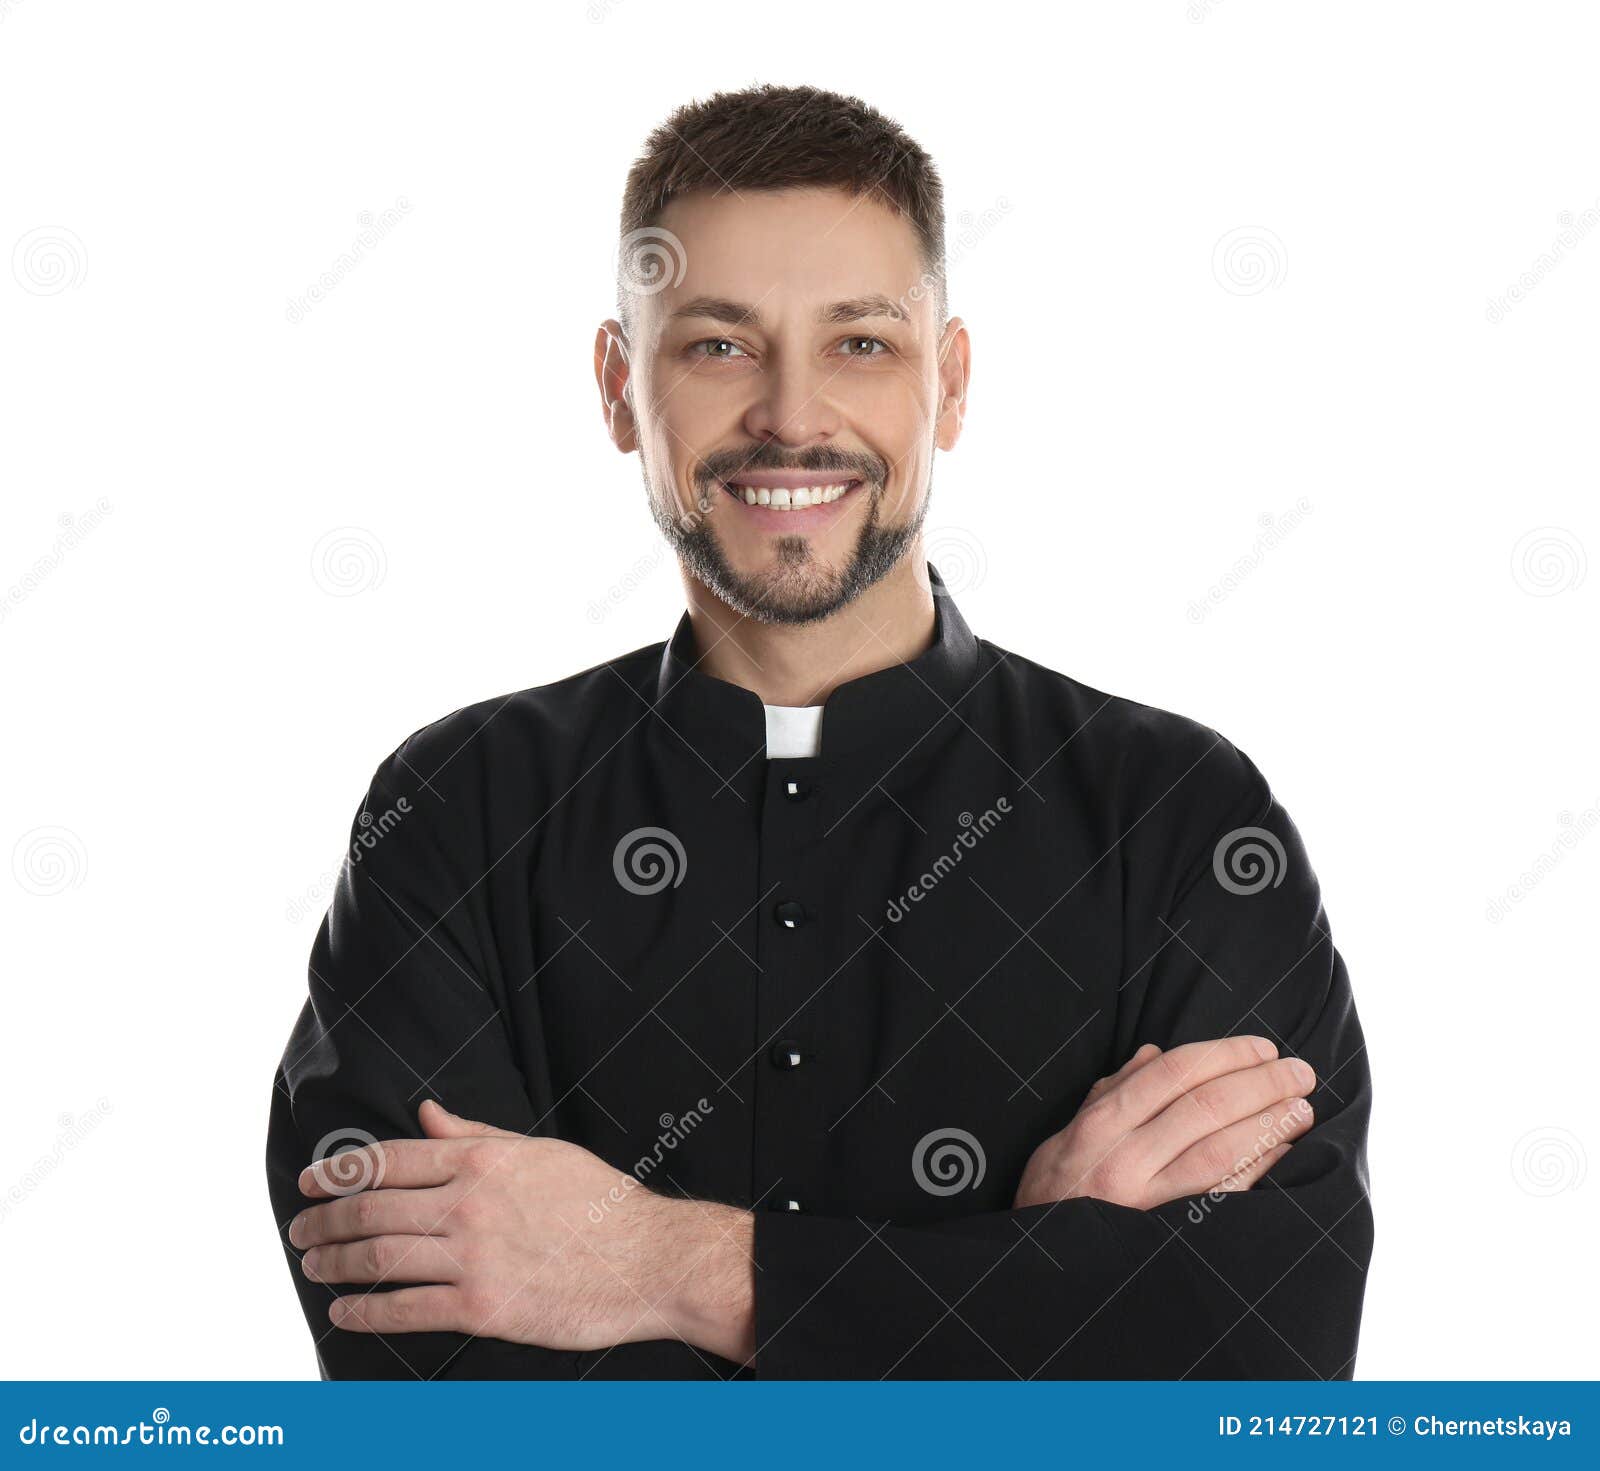 priest wearing cassock with clerical collar on white background